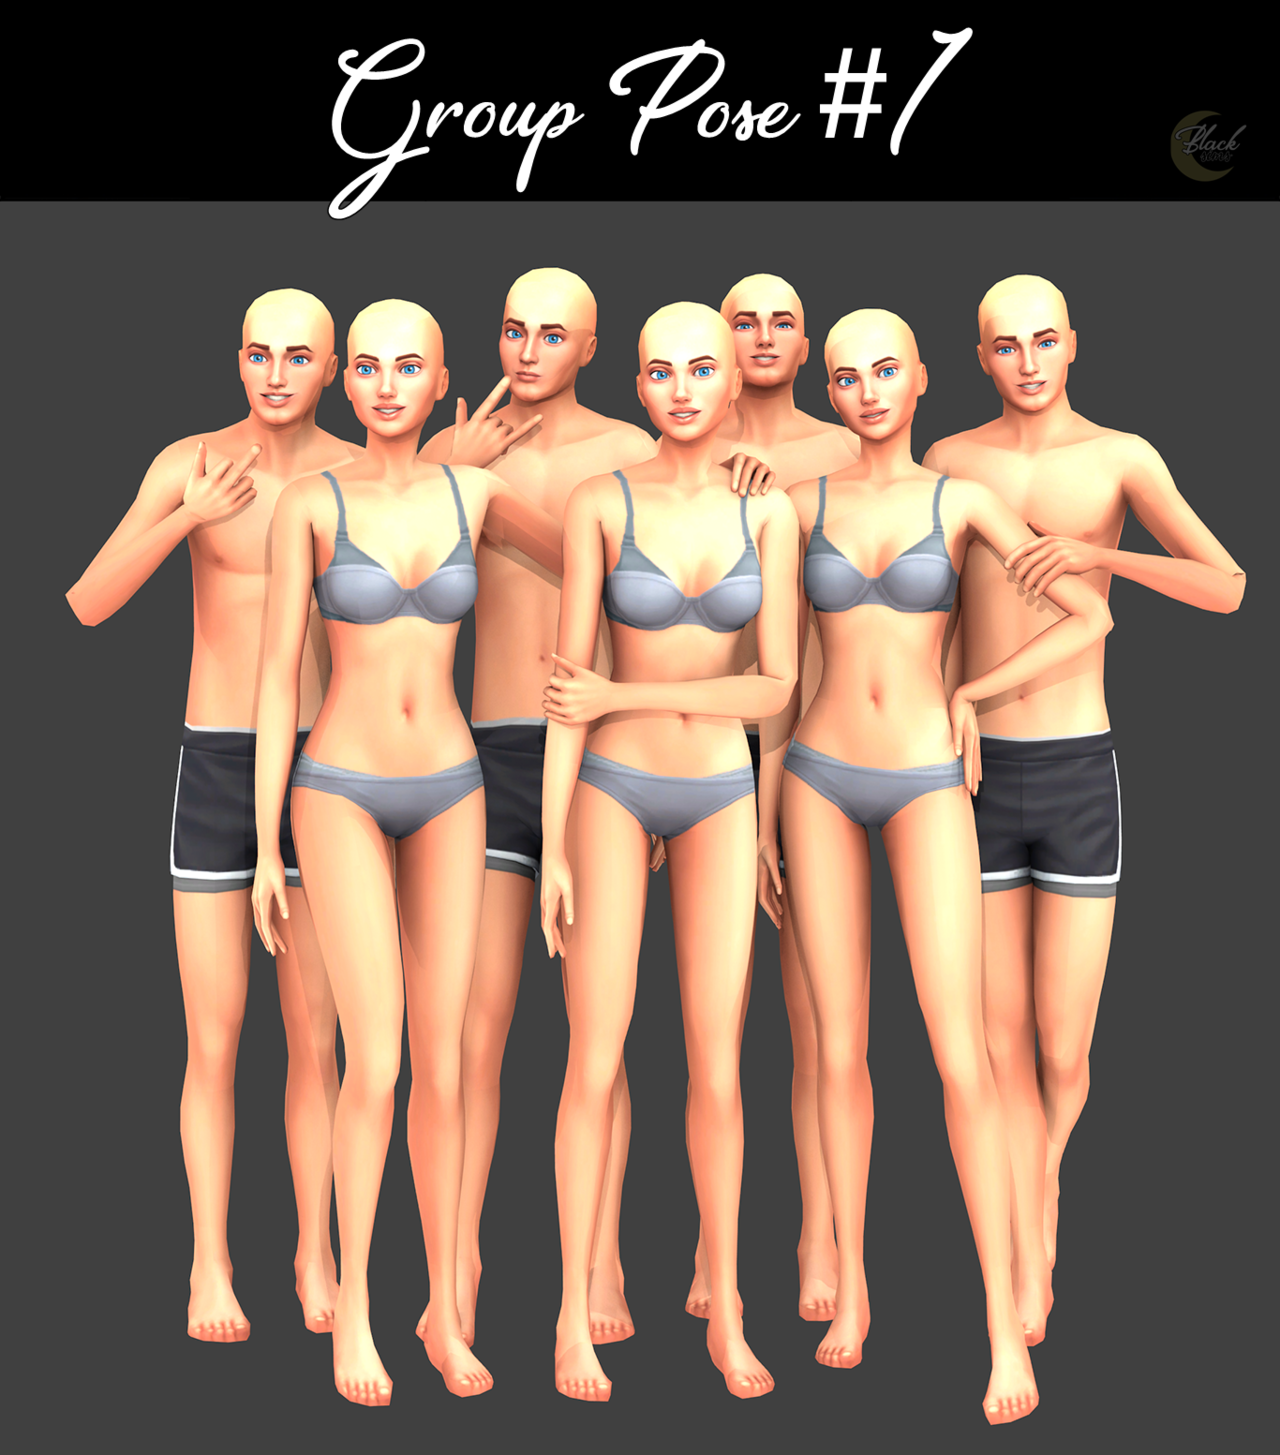 THE ROYAL SIMS — NEW POSE PACK ALERT! Hi, guys! It's been a while...